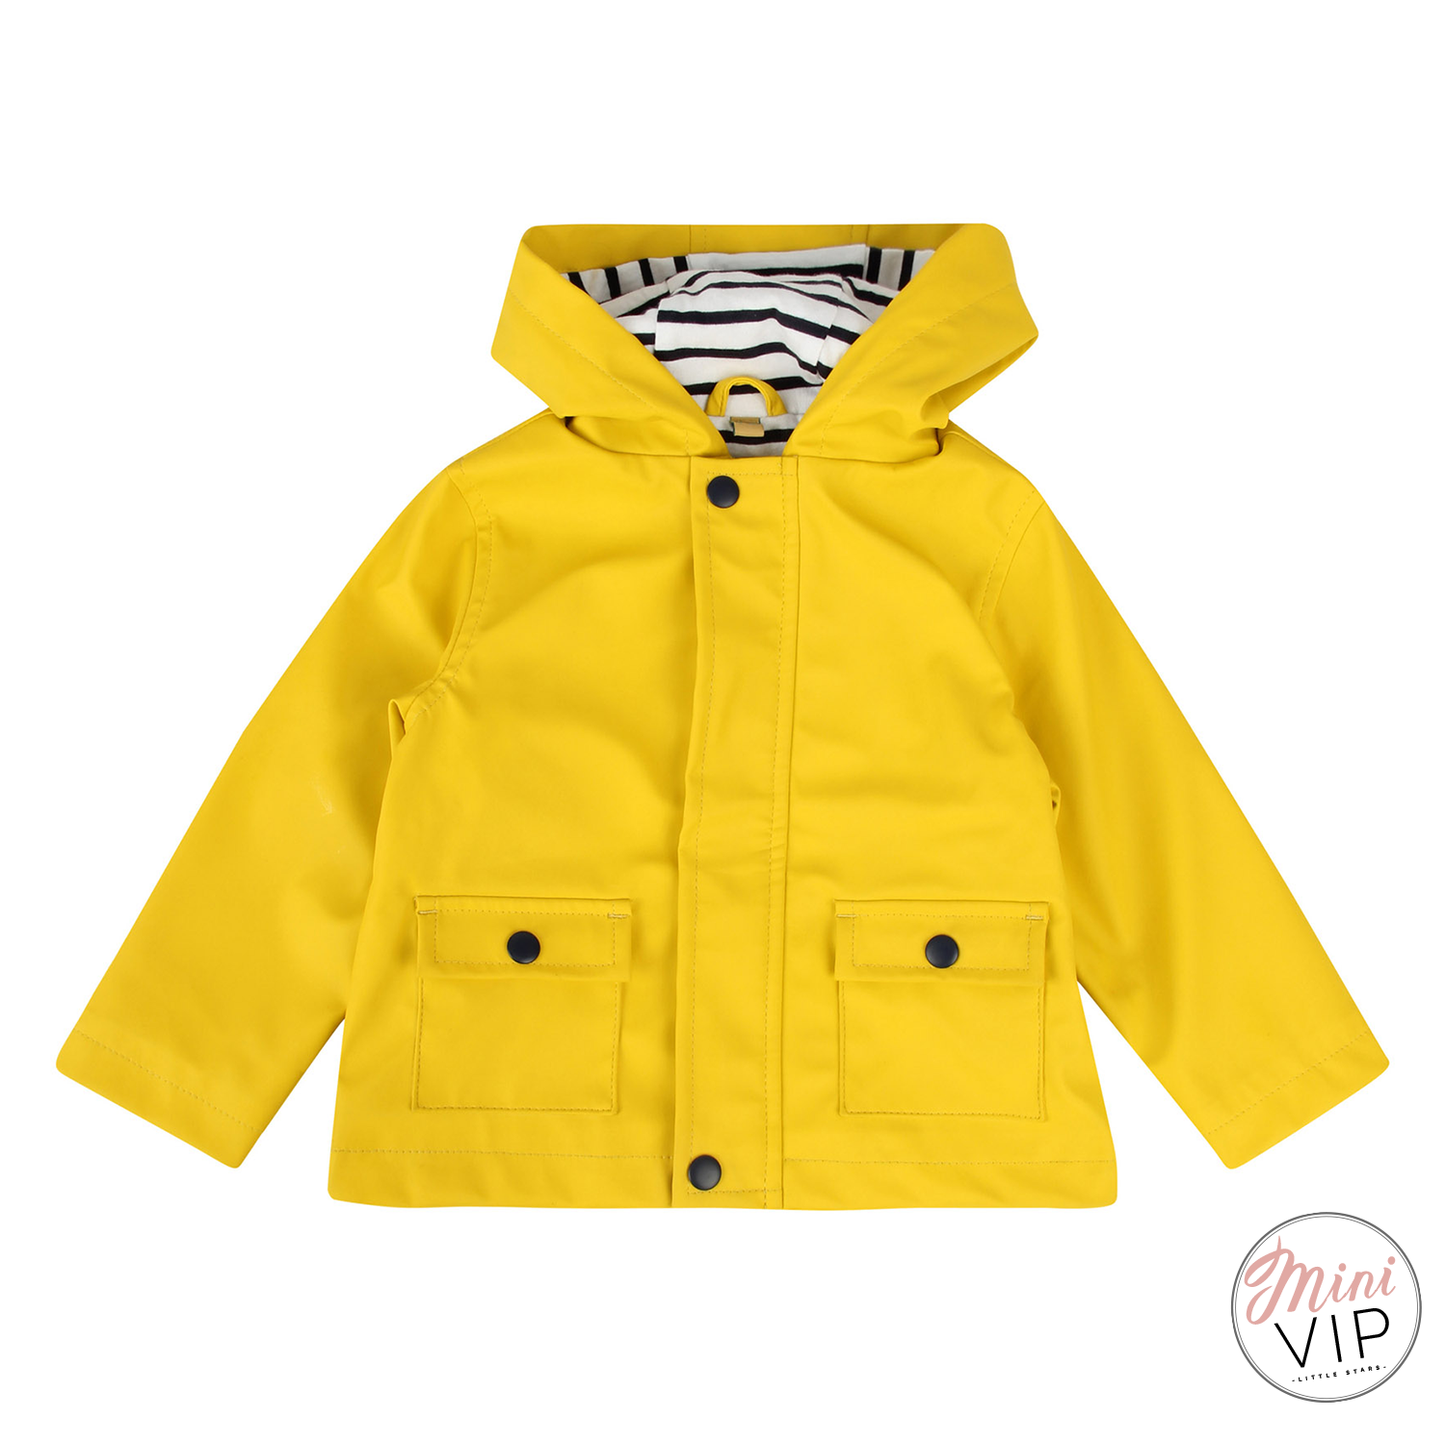 Baby/Toddler Embroidered Summer Jacket - Yellow, Navy or Red